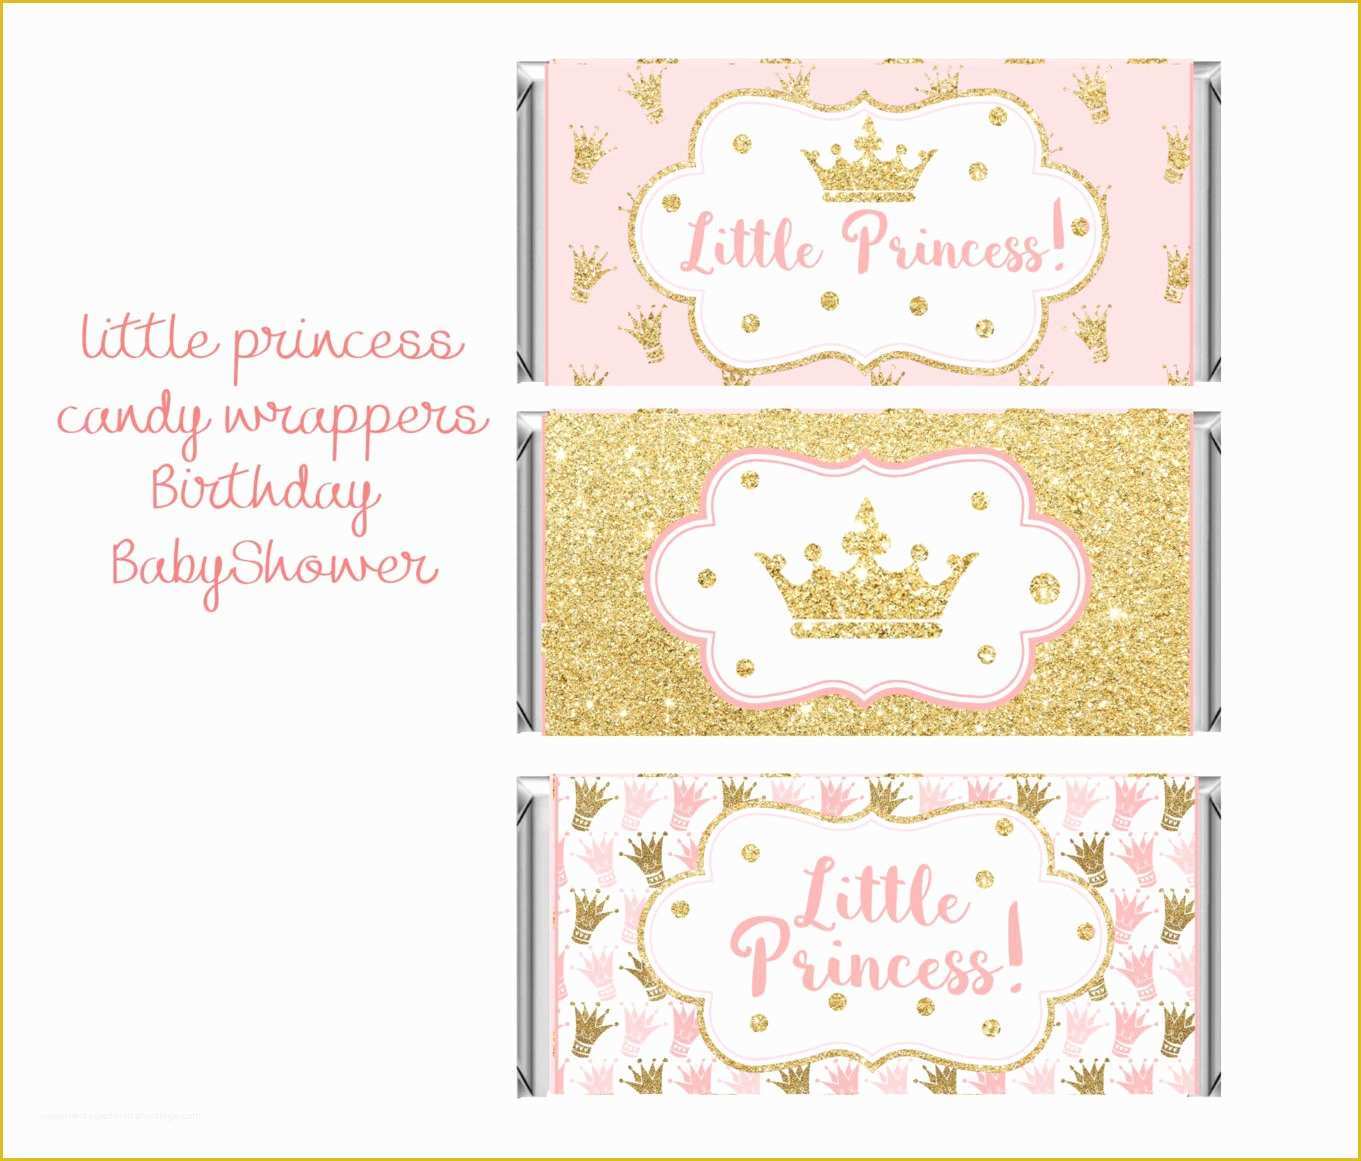 Candy Bar Wrappers Template for Baby Shower Printable Free Of Princess Candy Bar Wrapper Little Princess Candy Bar